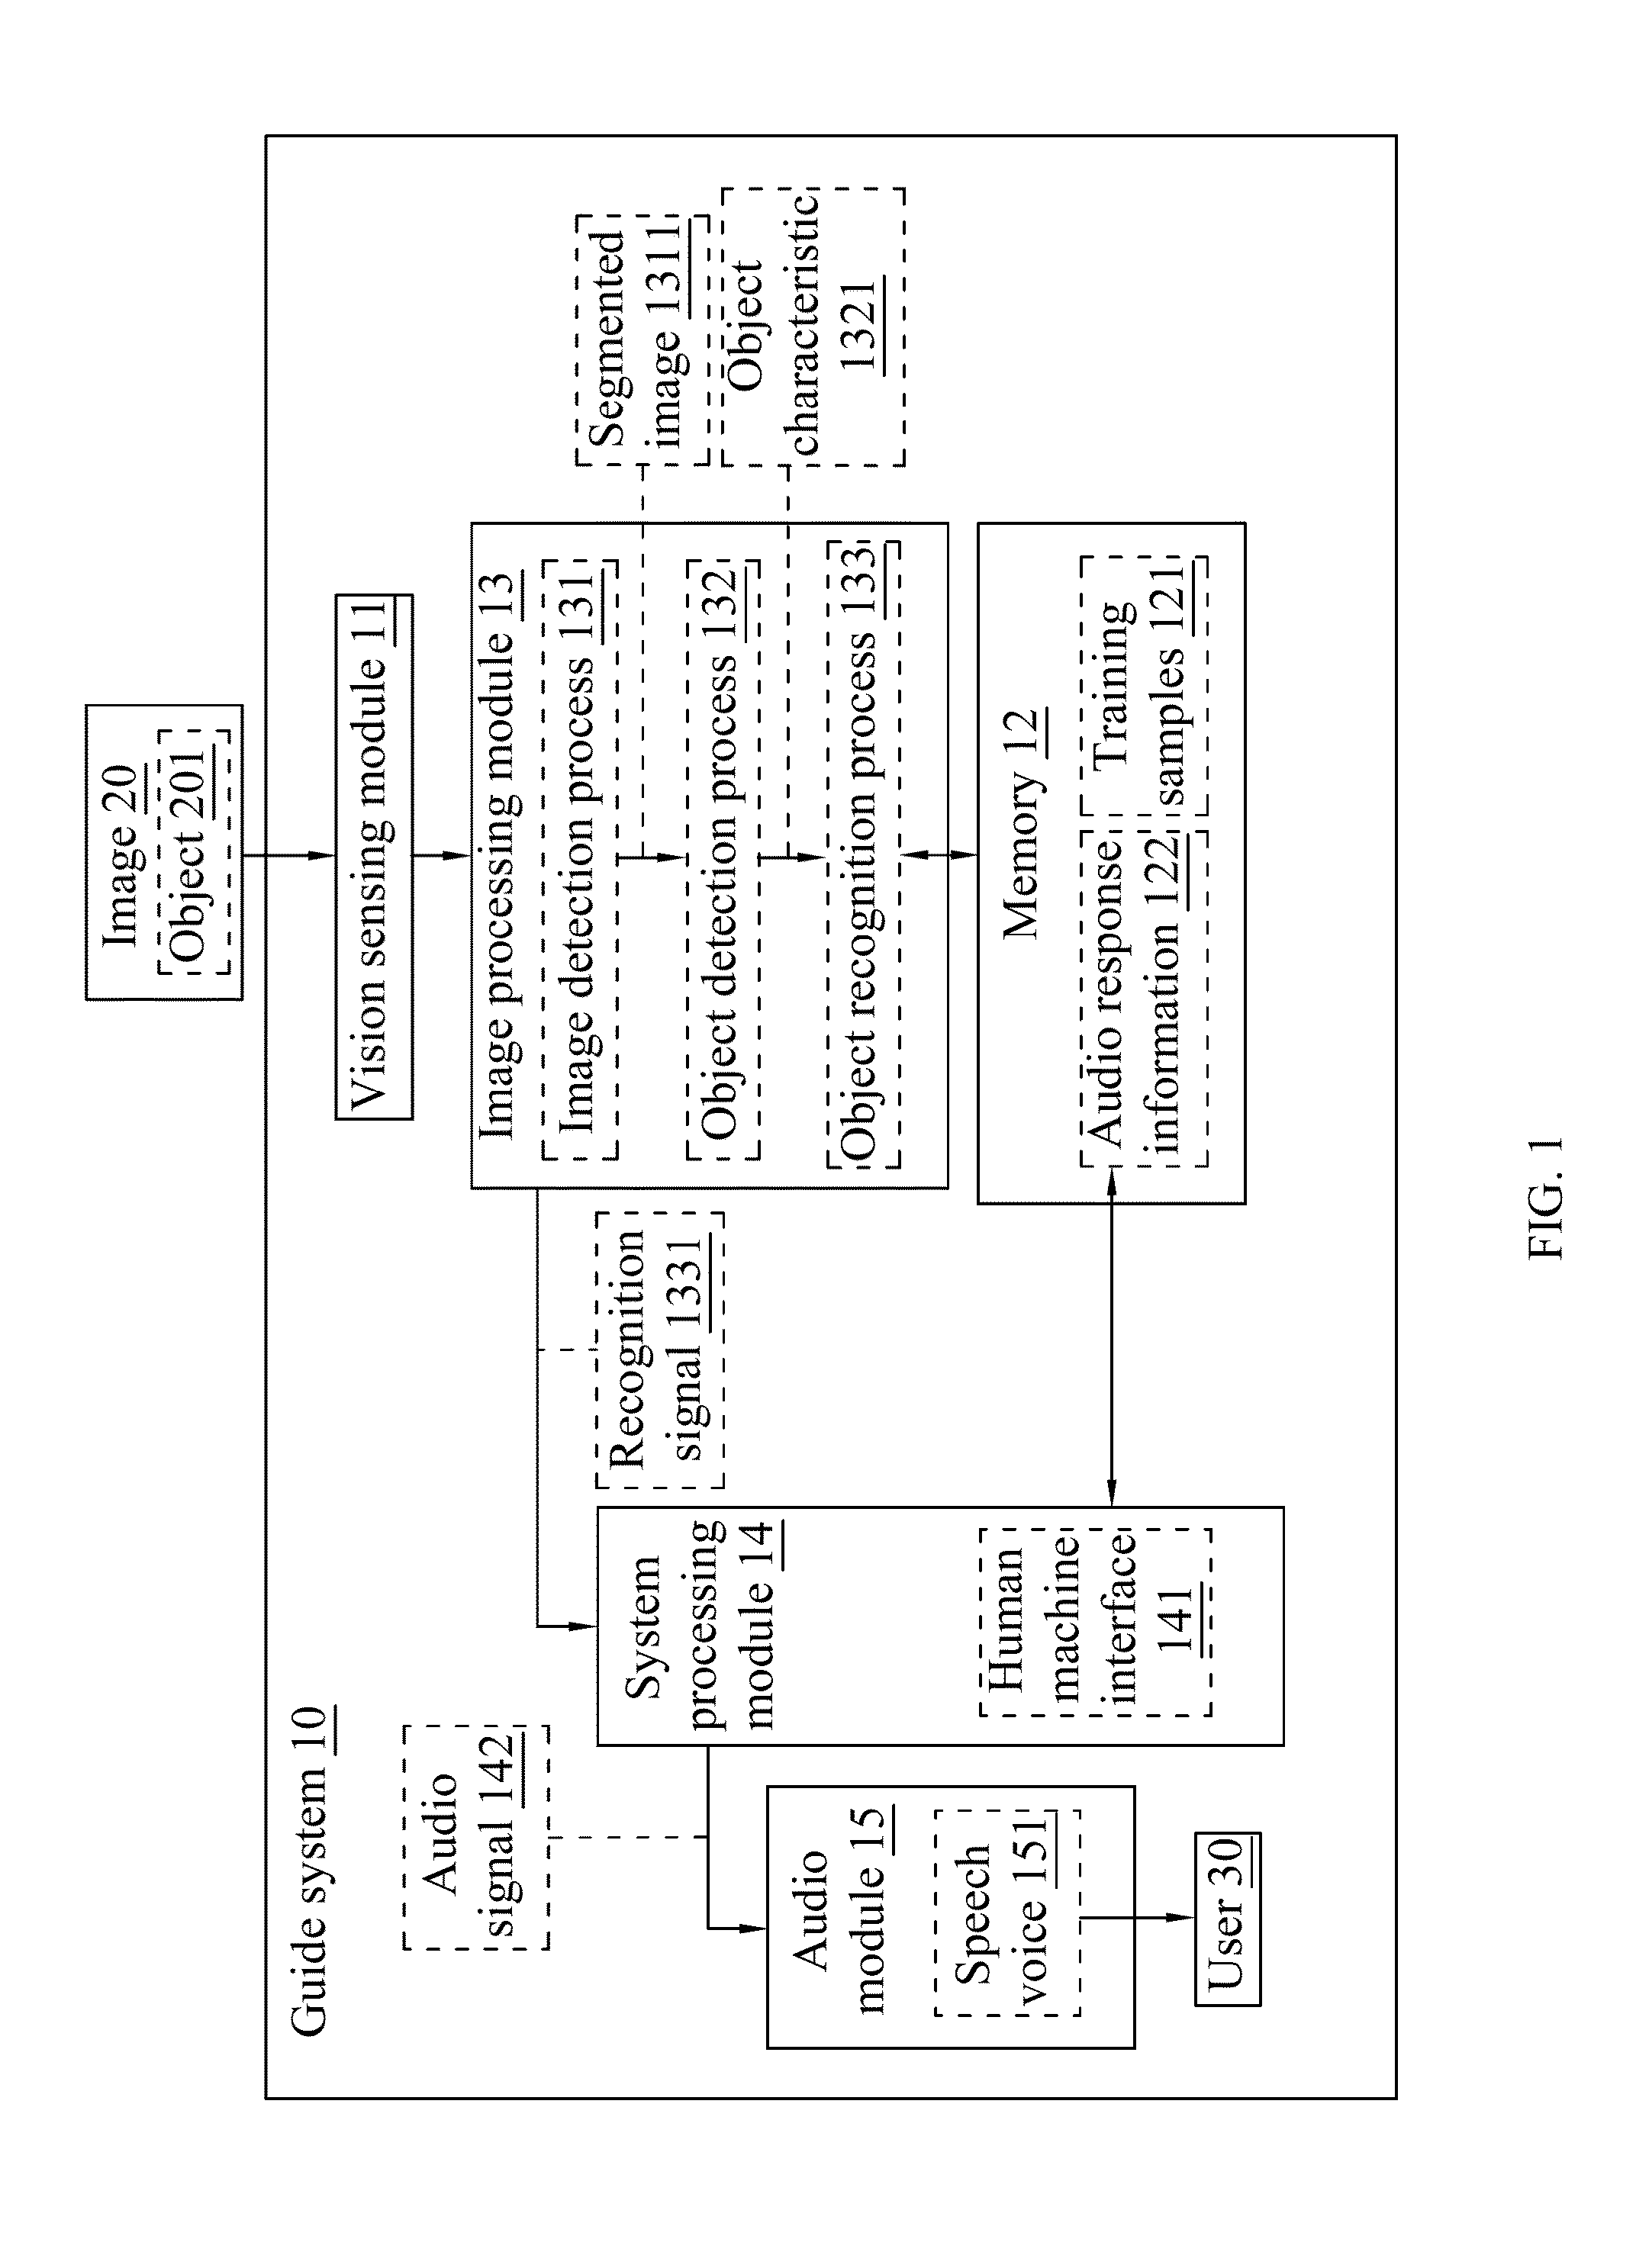 Guide System Having Function of Real-Time Voice Response for the Visually Impaired and Method Thereof